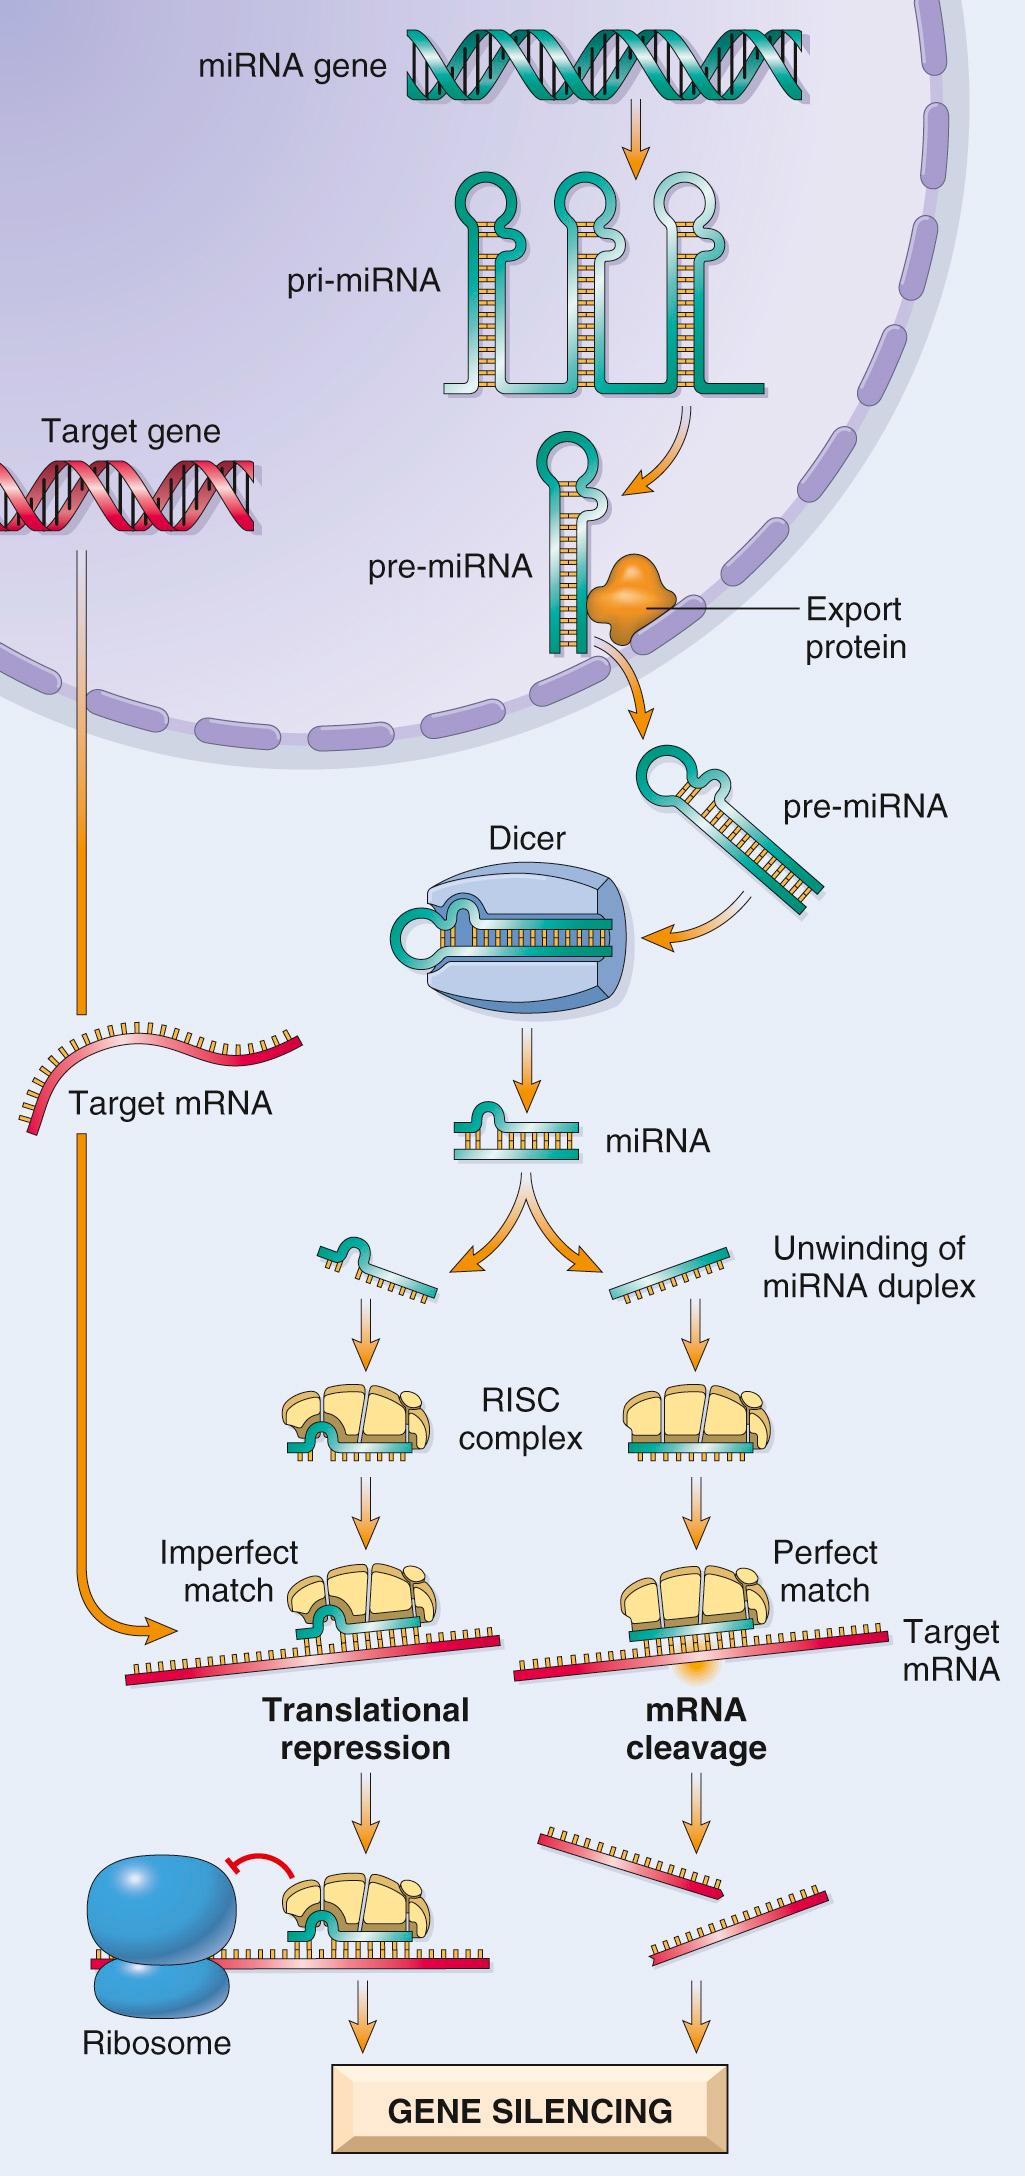 Figure 1.3, Generation of microRNAs (miRNAs) and their mode of action in regulating gene function. Transcription of a miRNA produces a primary miRNA (pri-miRNA), which is processed within the nucleus to form pre-miRNA composed of a single RNA strand with secondary hairpin loop structures and stretches of double-stranded RNA. After export out of the nucleus via specific transporter proteins, pre-miRNA is trimmed by the cytoplasmic Dicer enzyme to generate mature double-stranded miRNAs of 21 to 30 nucleotides. The miRNA subsequently unwinds and the single strands are incorporated into multiprotein RNA-induced silencing complexes (RISC). Base pairing between single-stranded miRNA and the targeted messenger RNA (mRNA) directs RISC to either cleave or repress translation of the mRNA, resulting in posttranscriptiontional silencing.